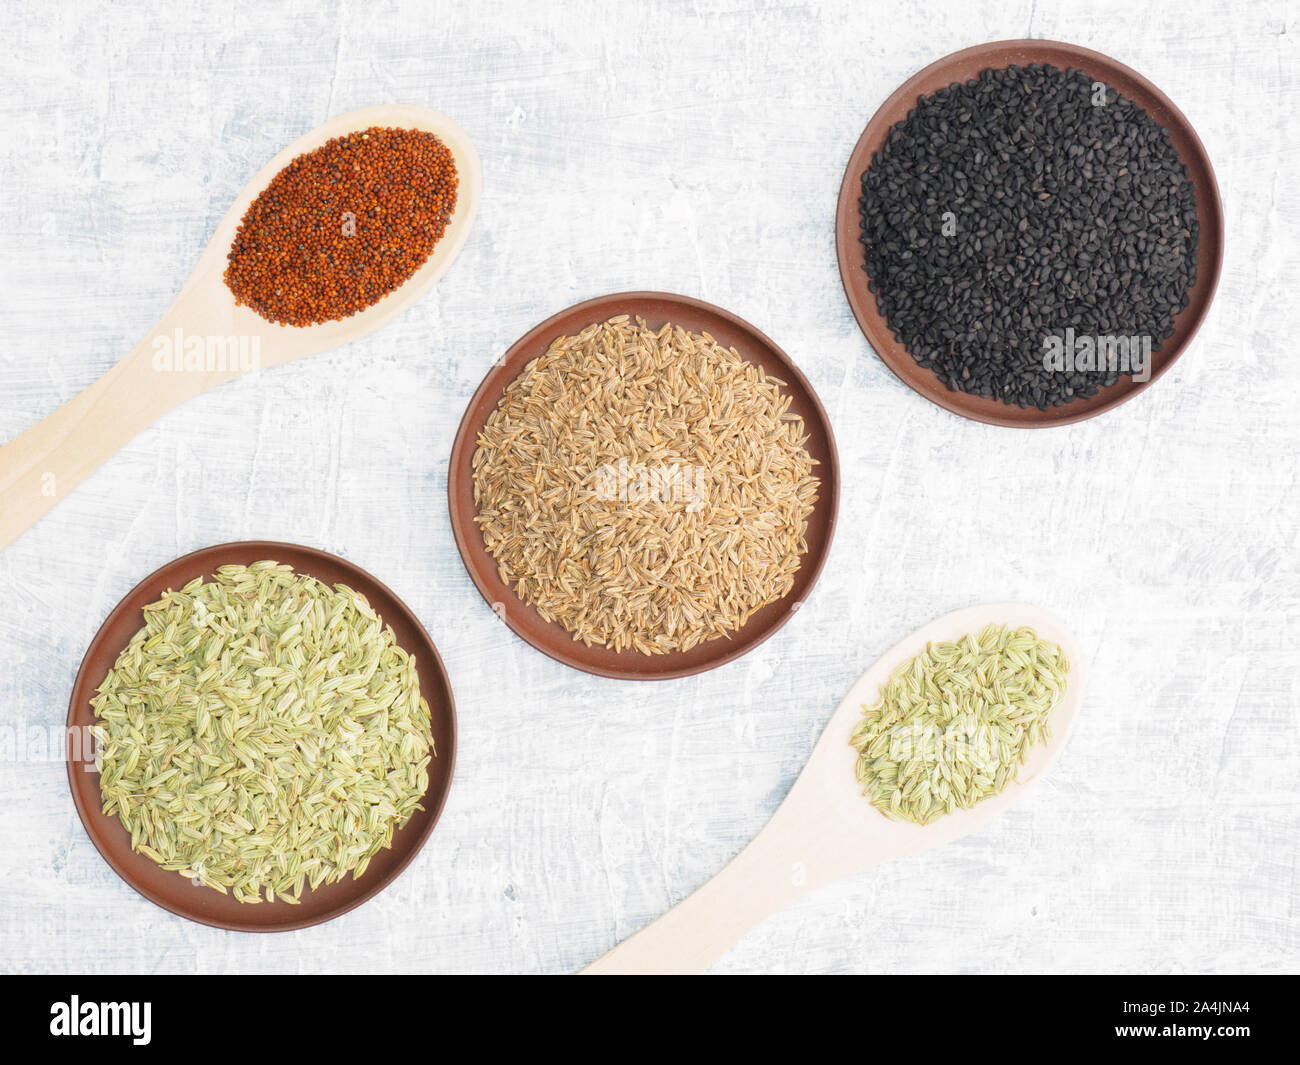 Spices set on concrete background in clay plate and spoon. Black cumin, jeera, fennel, mustard seeds. Modern apothecary, naturopathy and ayurveda conc Stock Photo